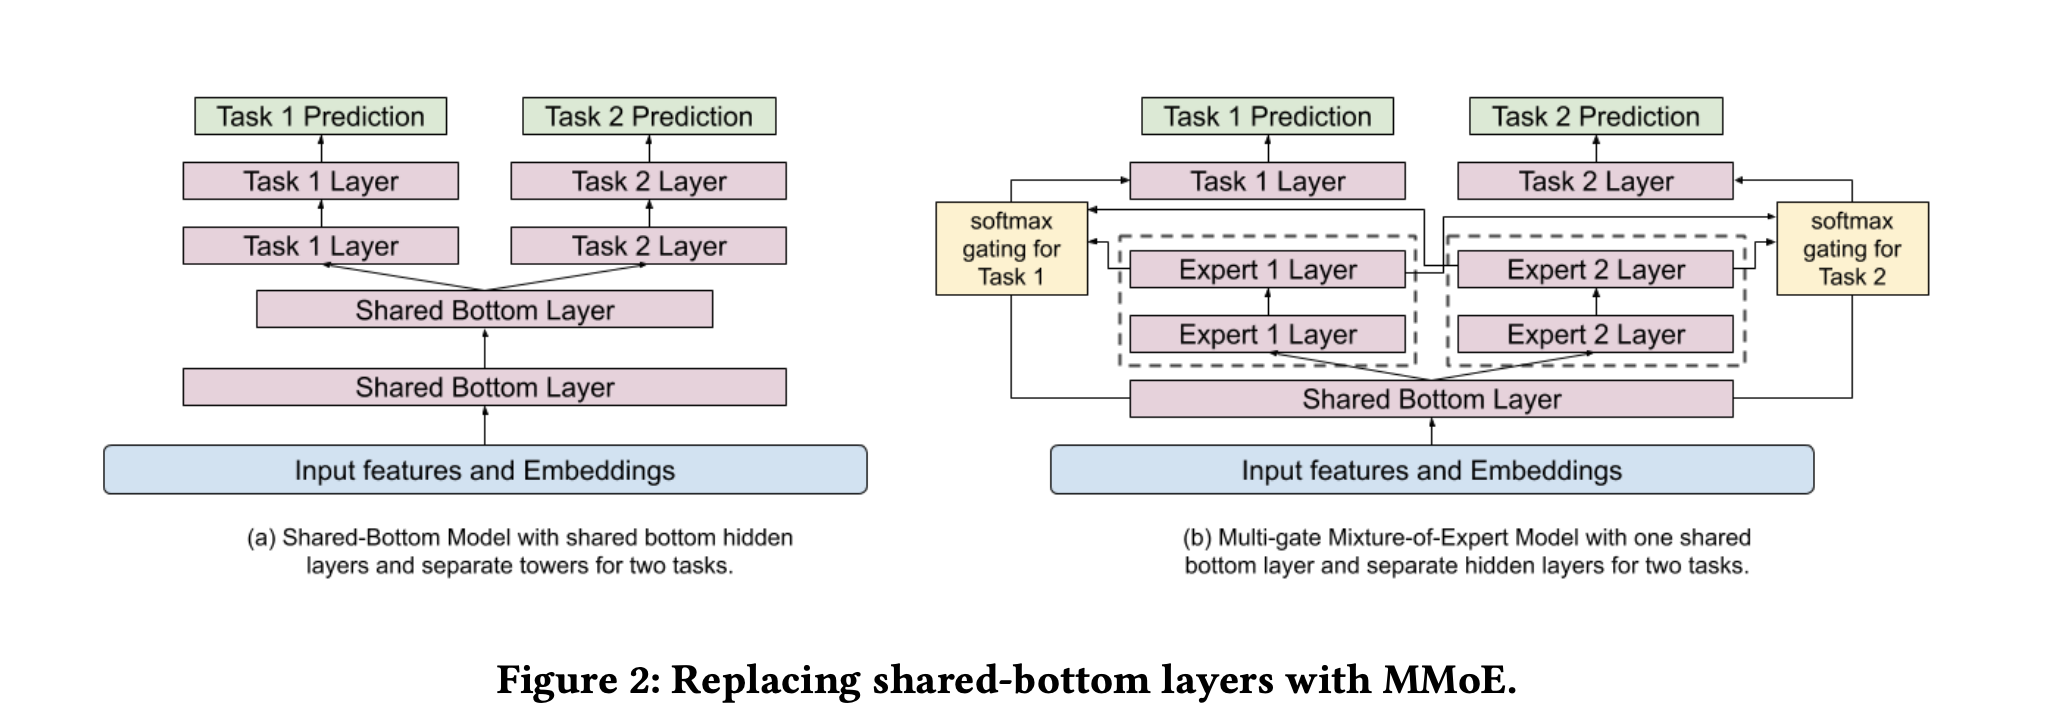 Figure 2: Replacing shared-bottom layers with MMoE.